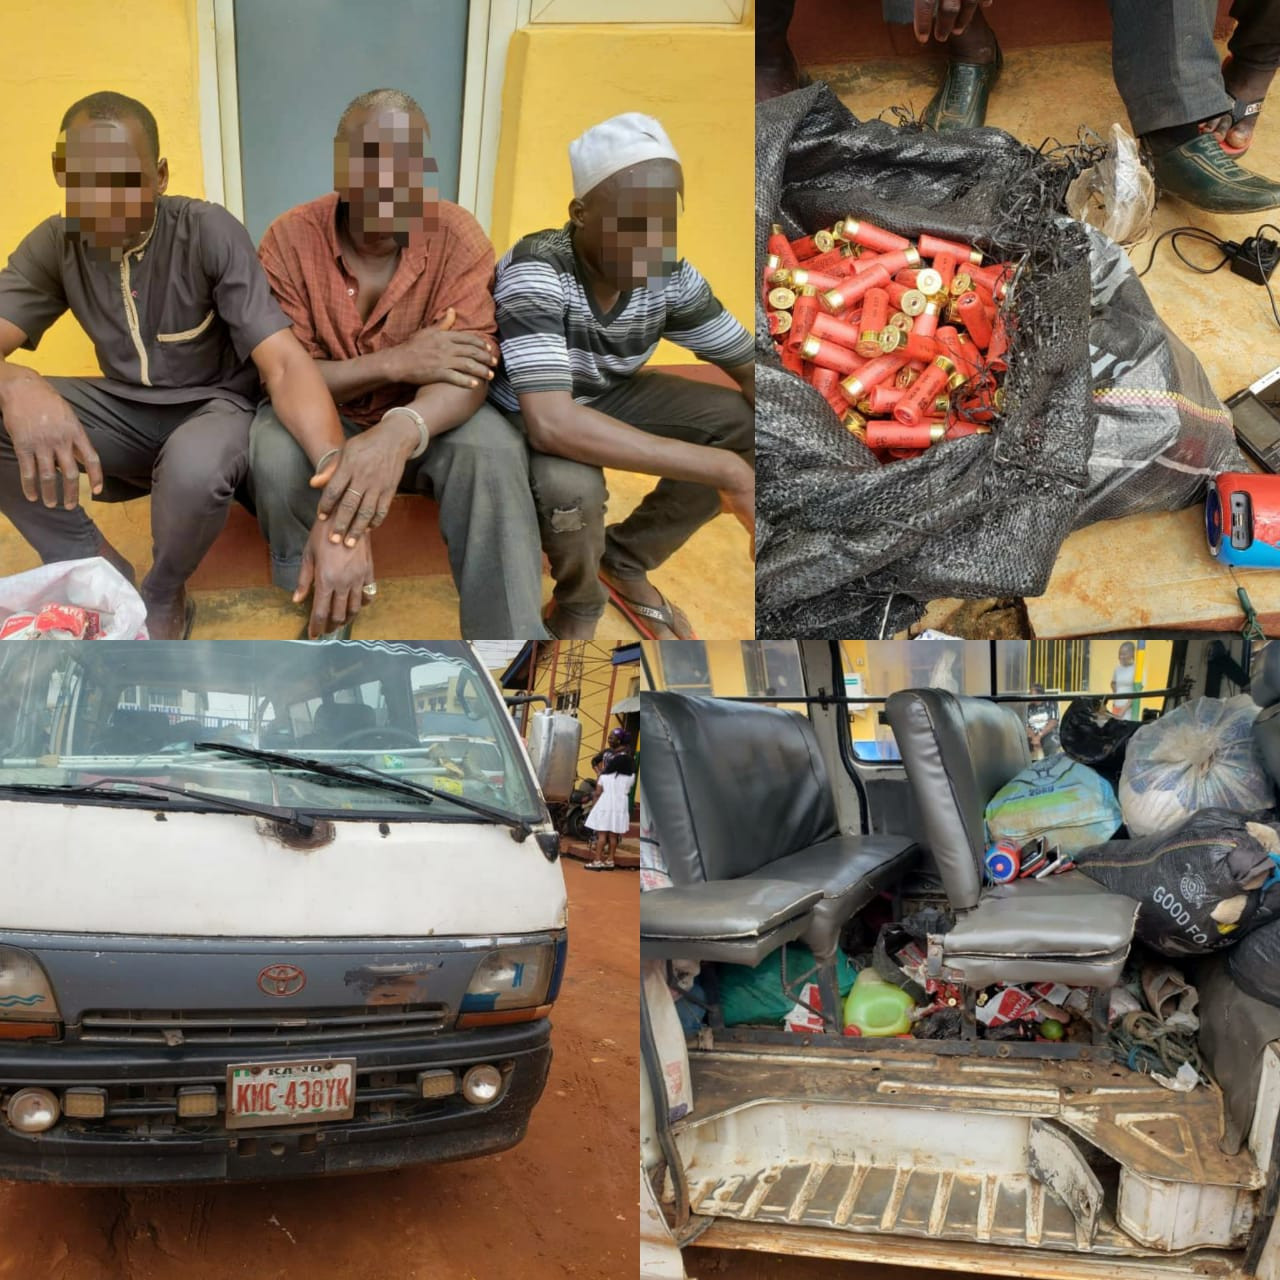 3 Men, Vehicles Loaded With Ammunition, Explosives Nabbed in Lagos | Daily Report Nigeria